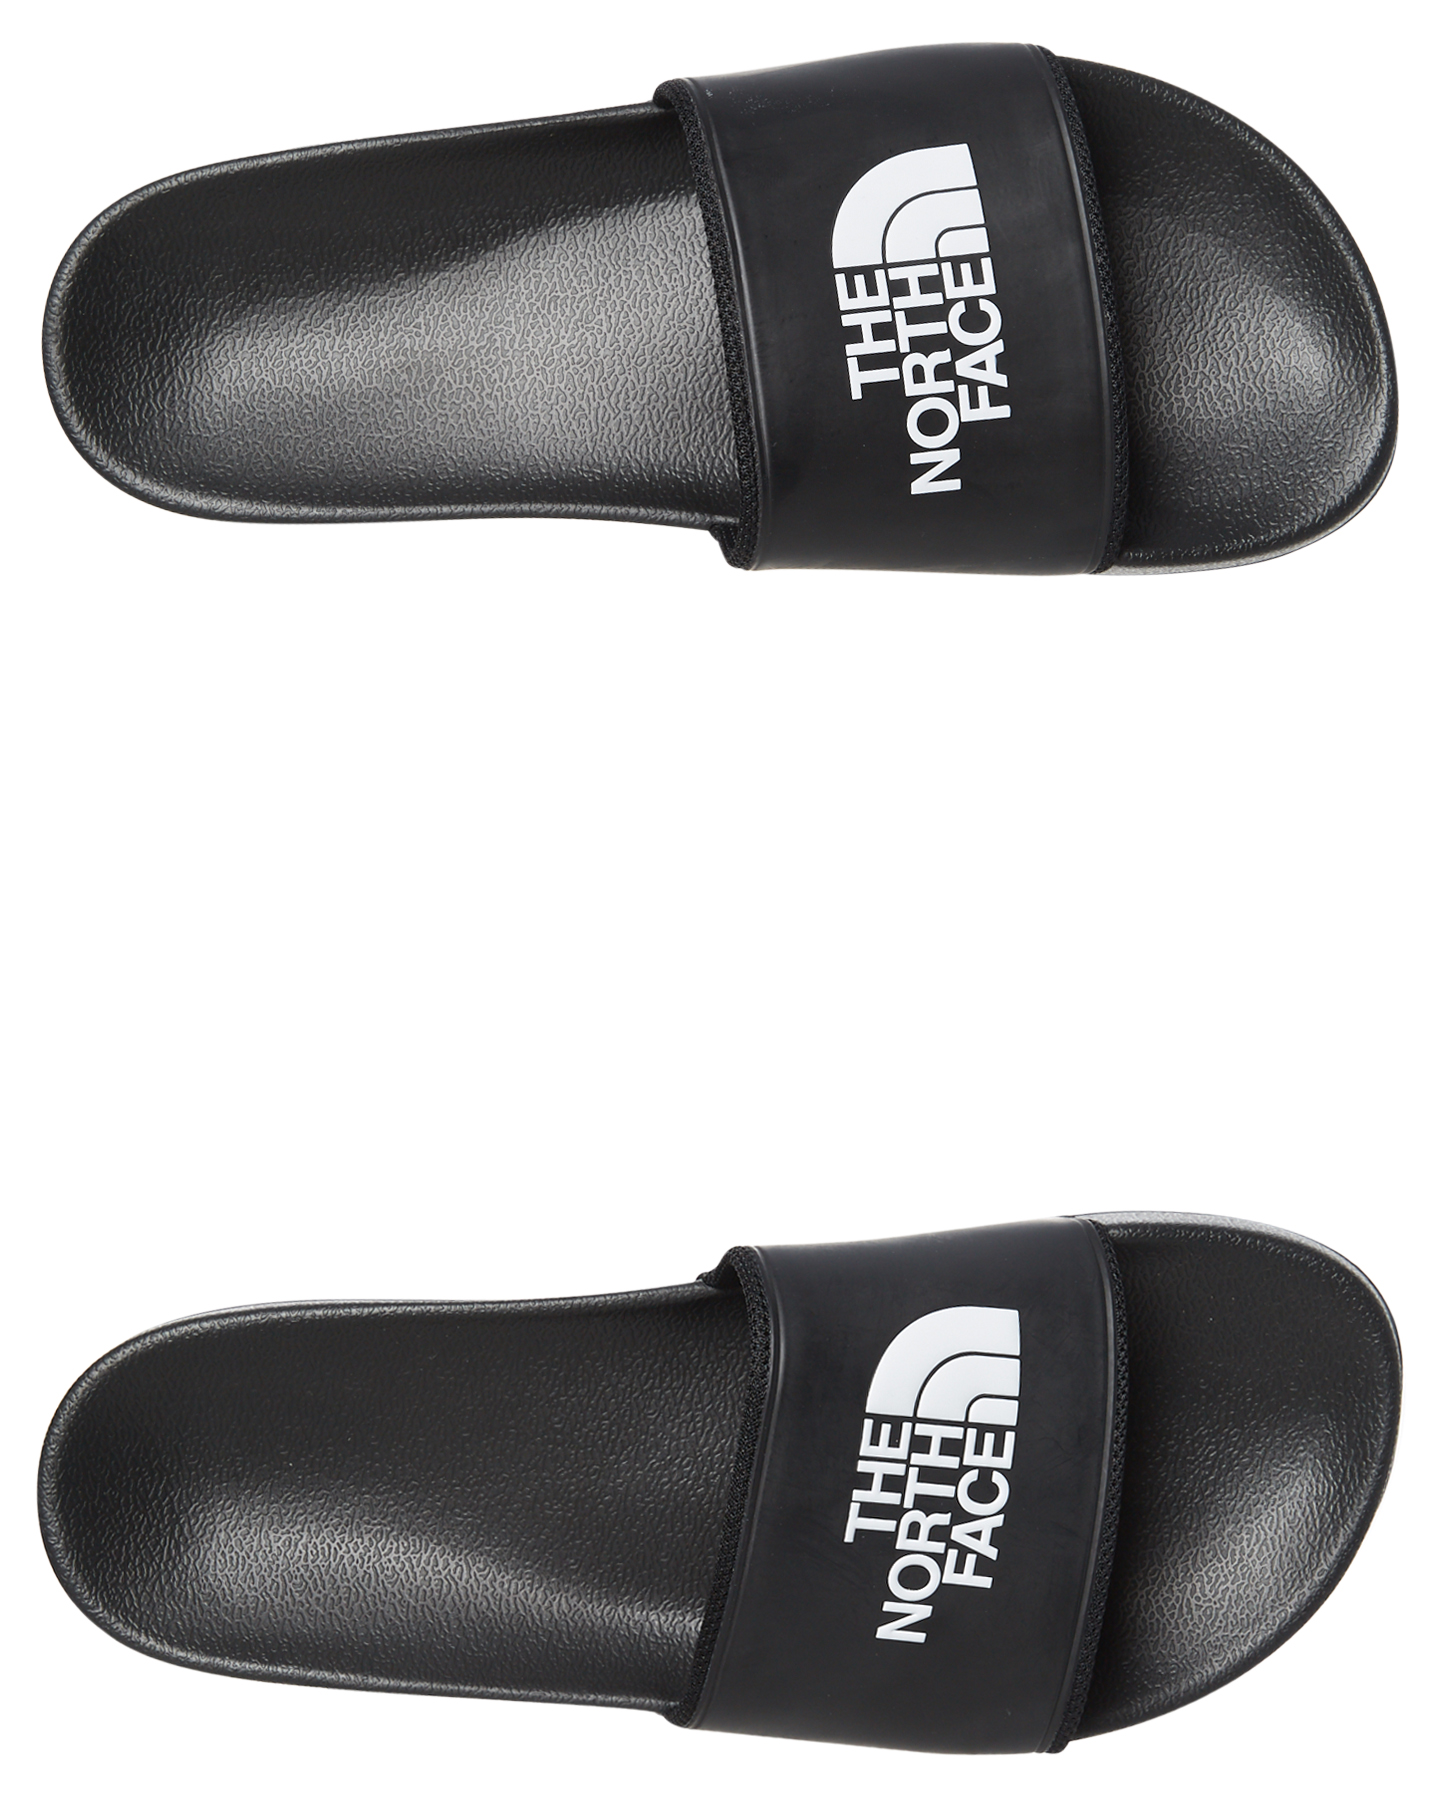 North Face Slipper Size Chart